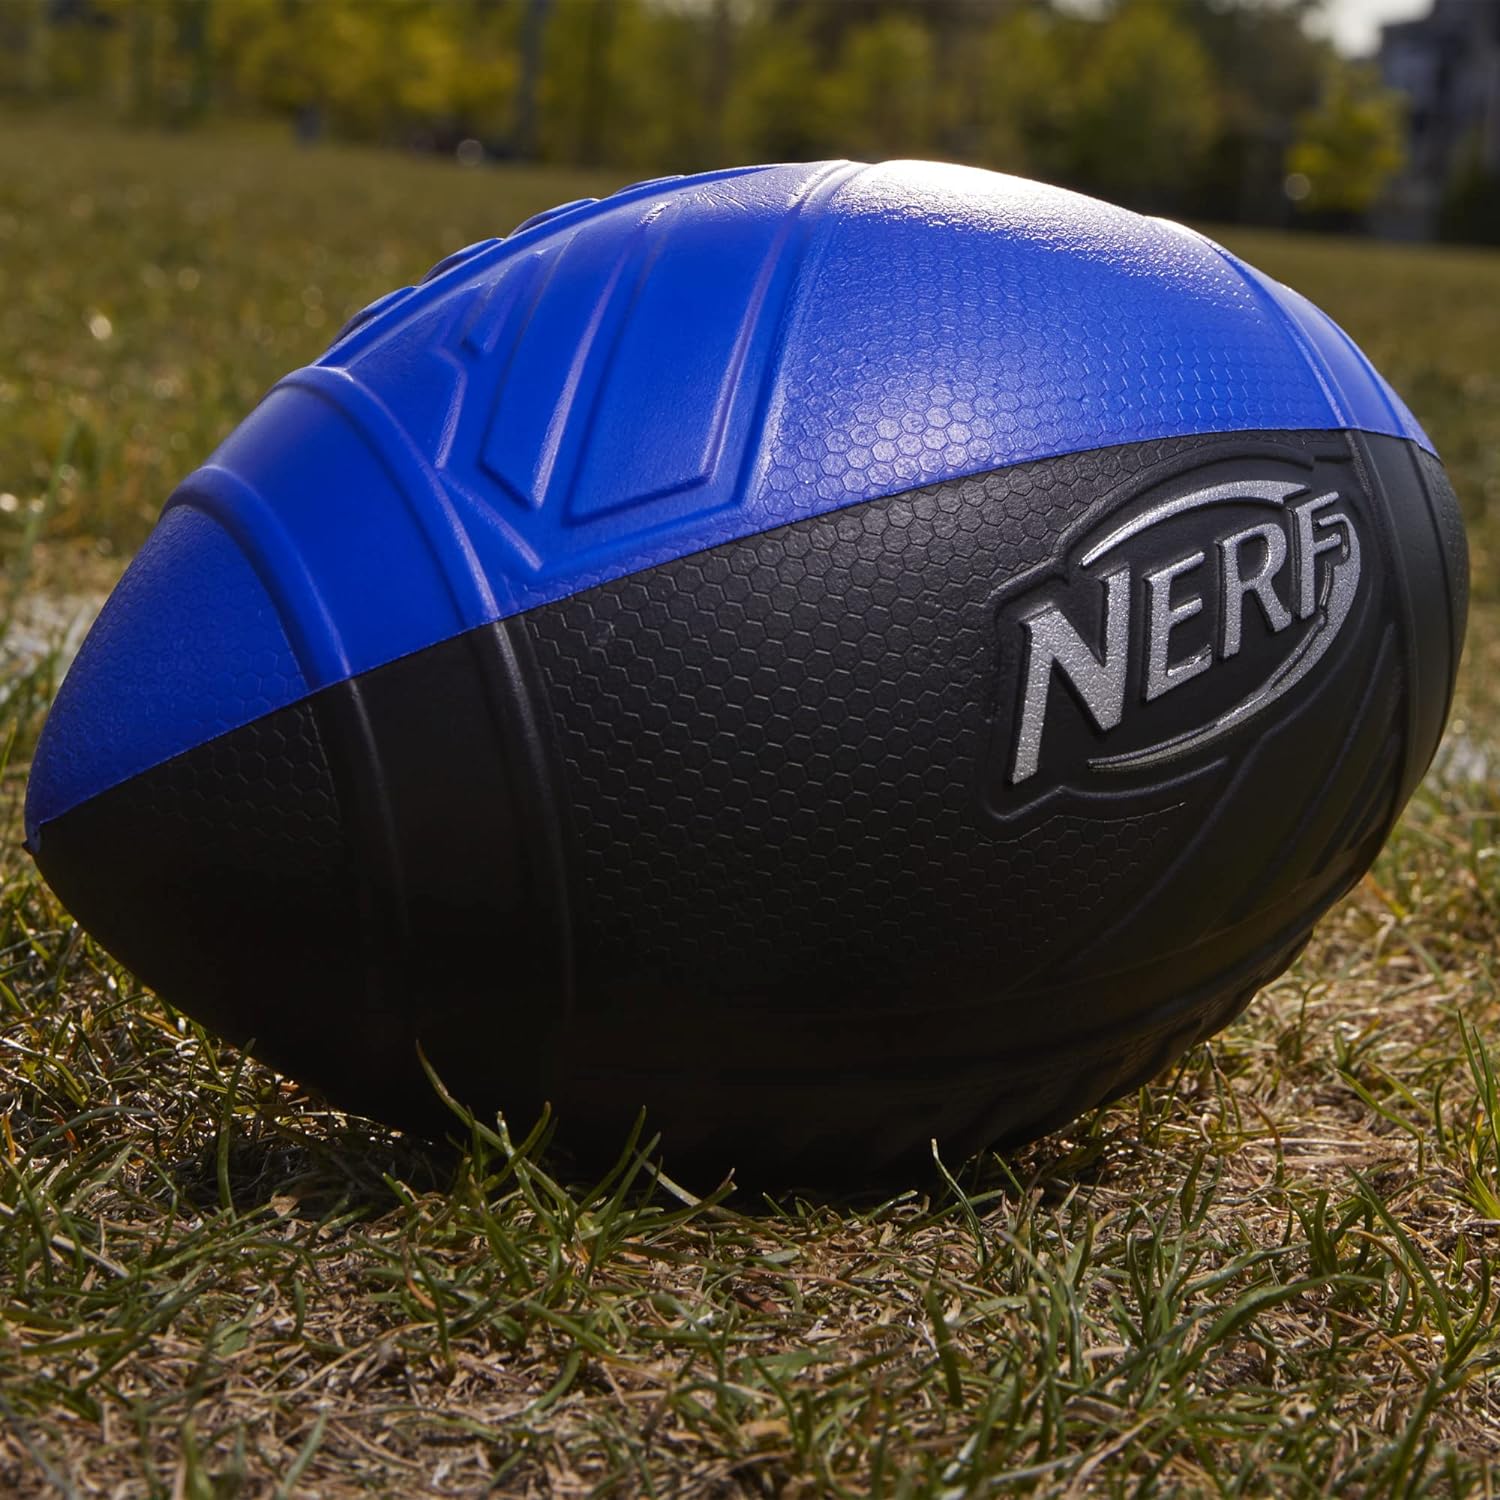 NERF Pro Grip Football, Classic Foam Ball, Easy to Catch & Throw, Balls for Kids, Kids Sports Toys (Blue)